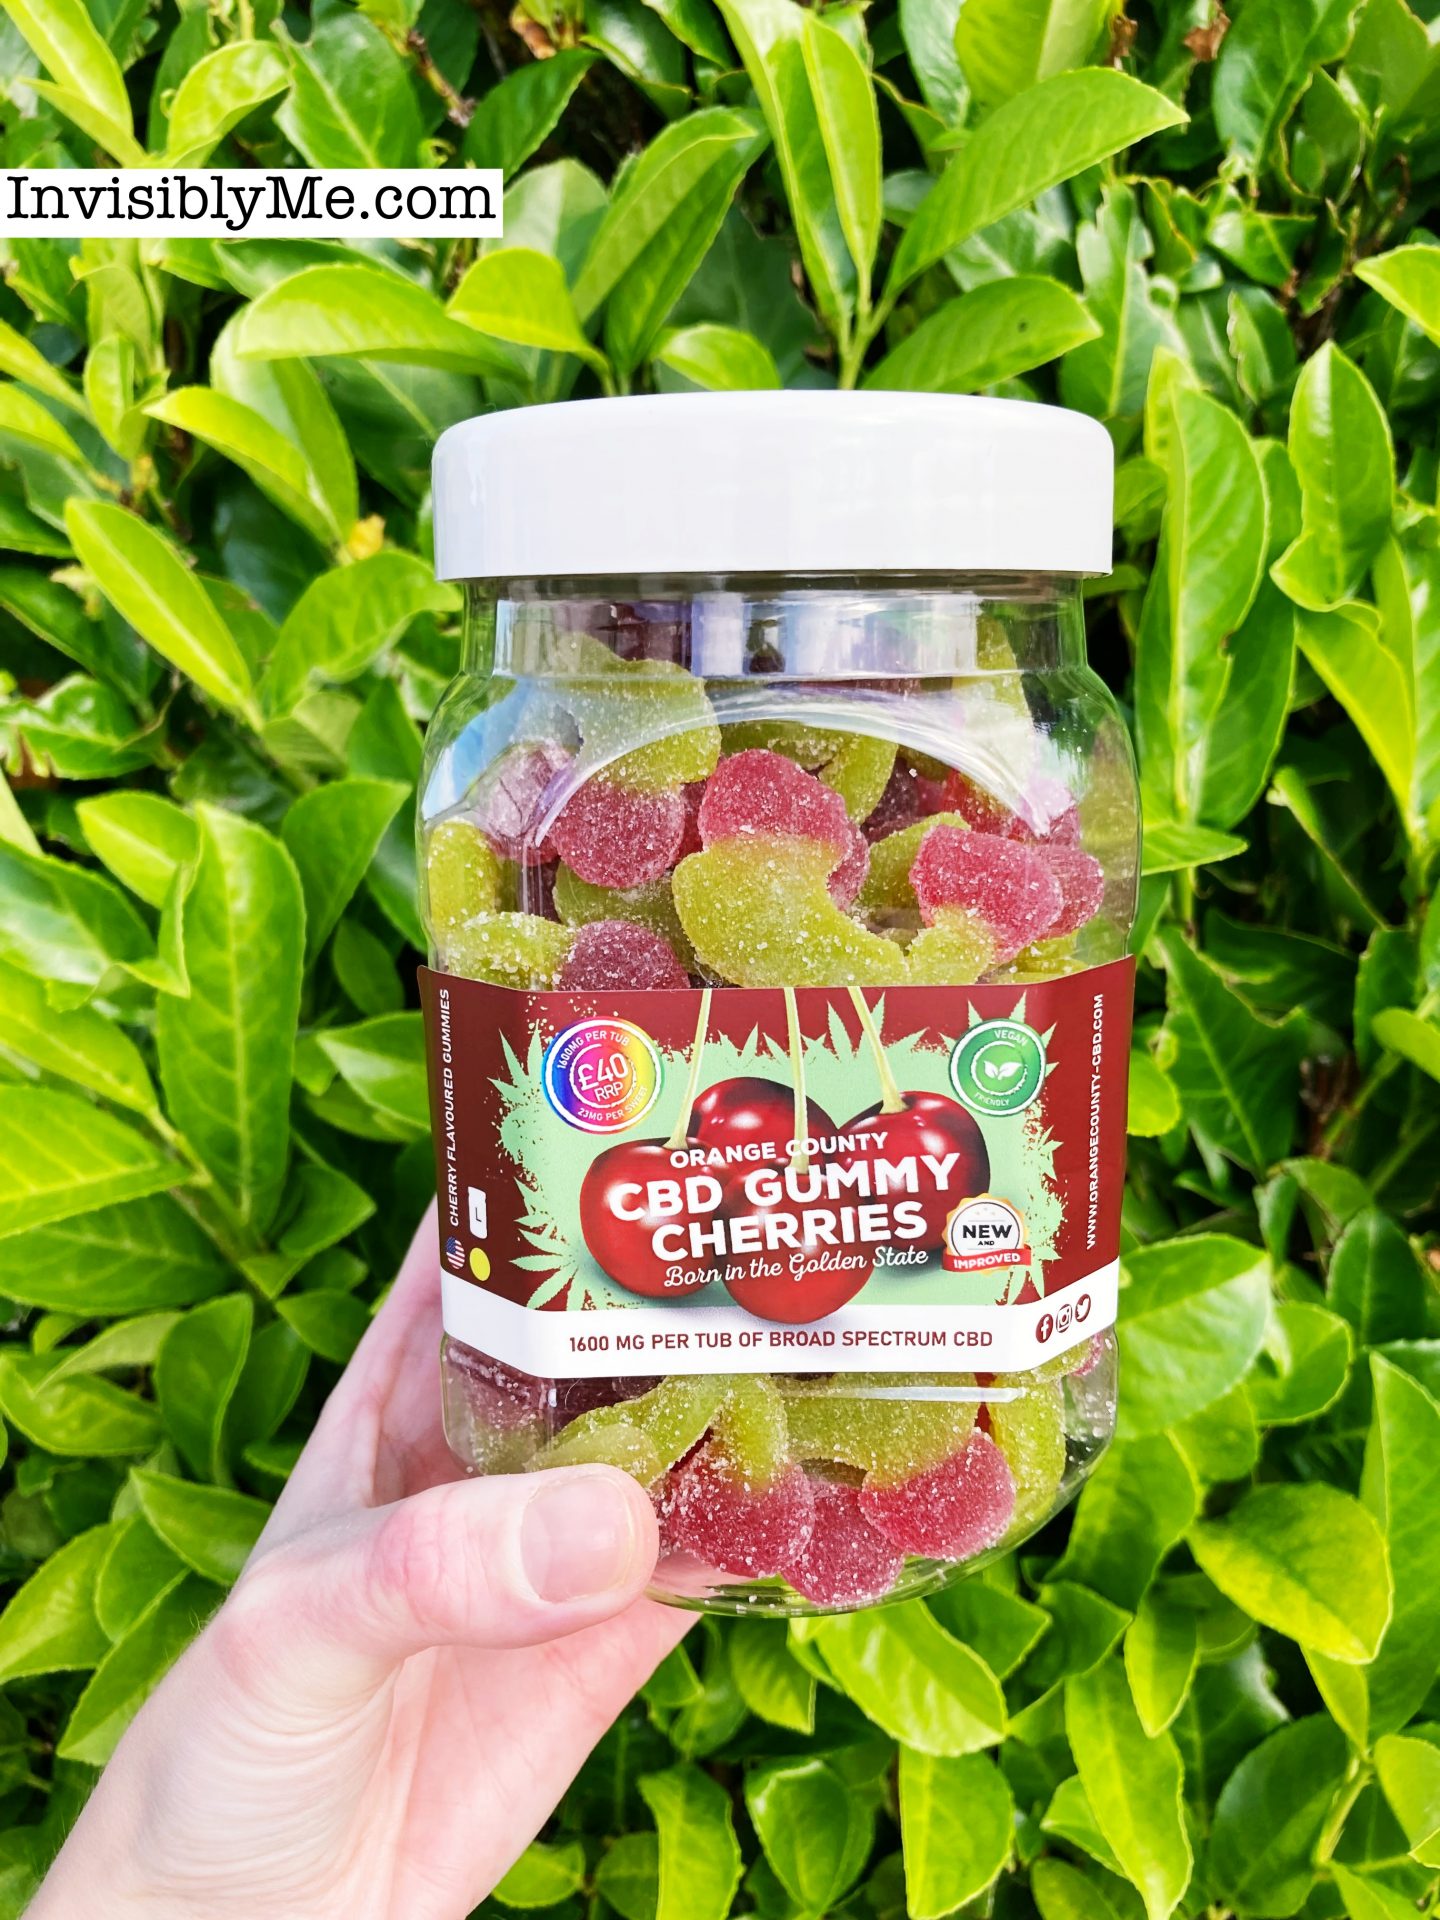 A photo of my hand holding the tub of Orange County CBD Gummy Cherries for this review in front of the green plant in my garden.